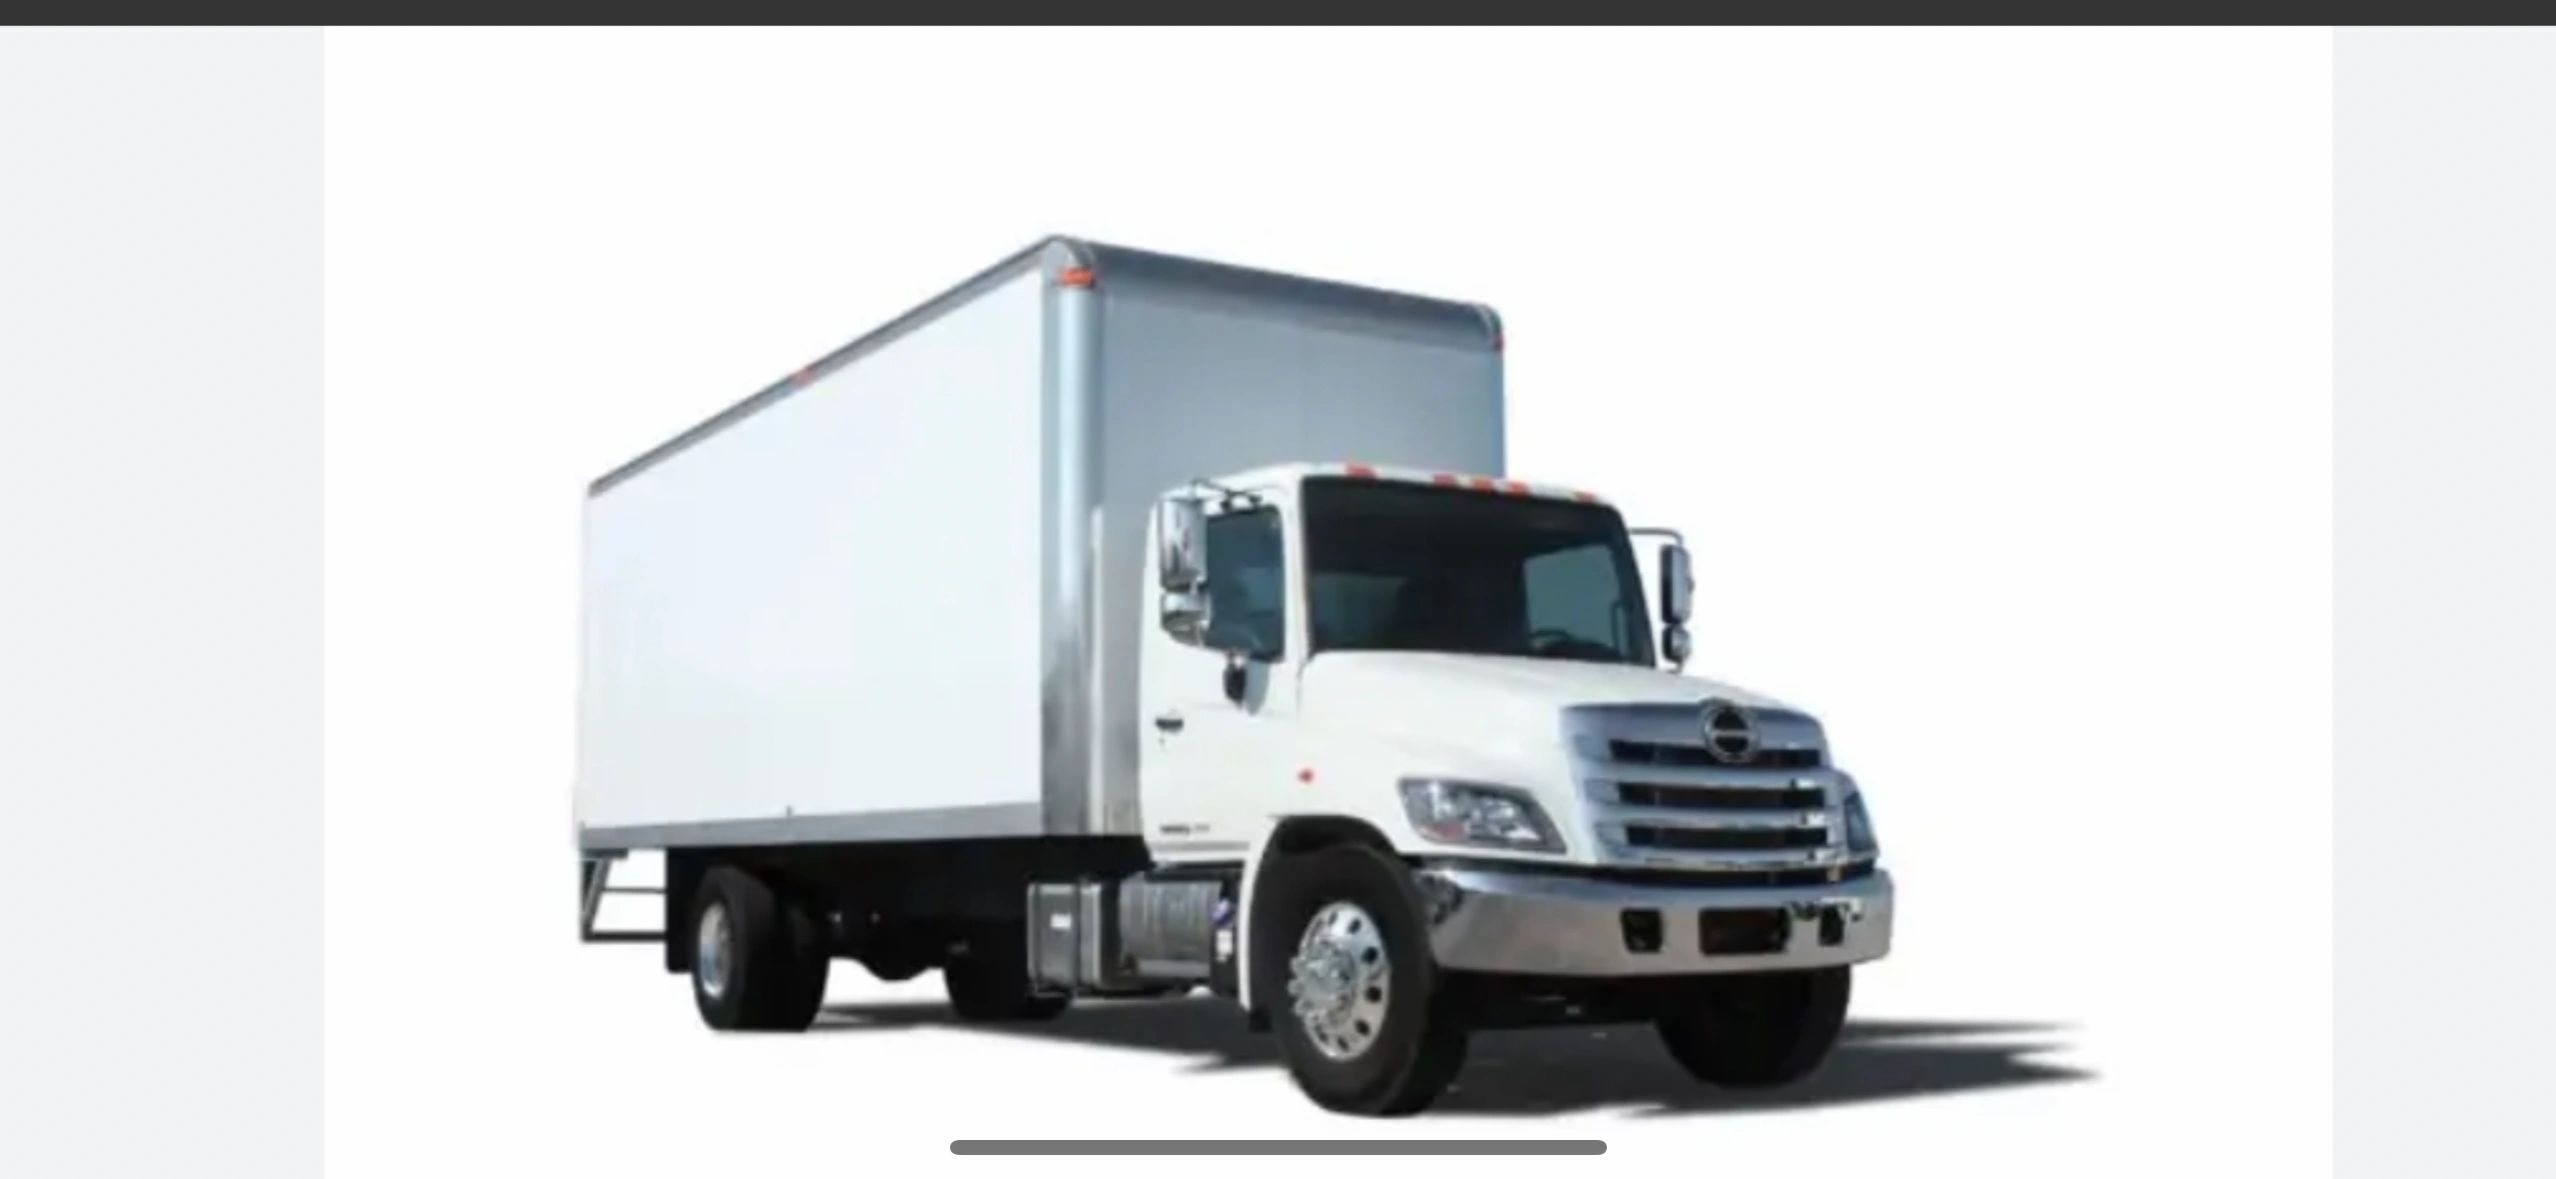 Courier in Edmonton  Same Day Delivery Edmonton Courier